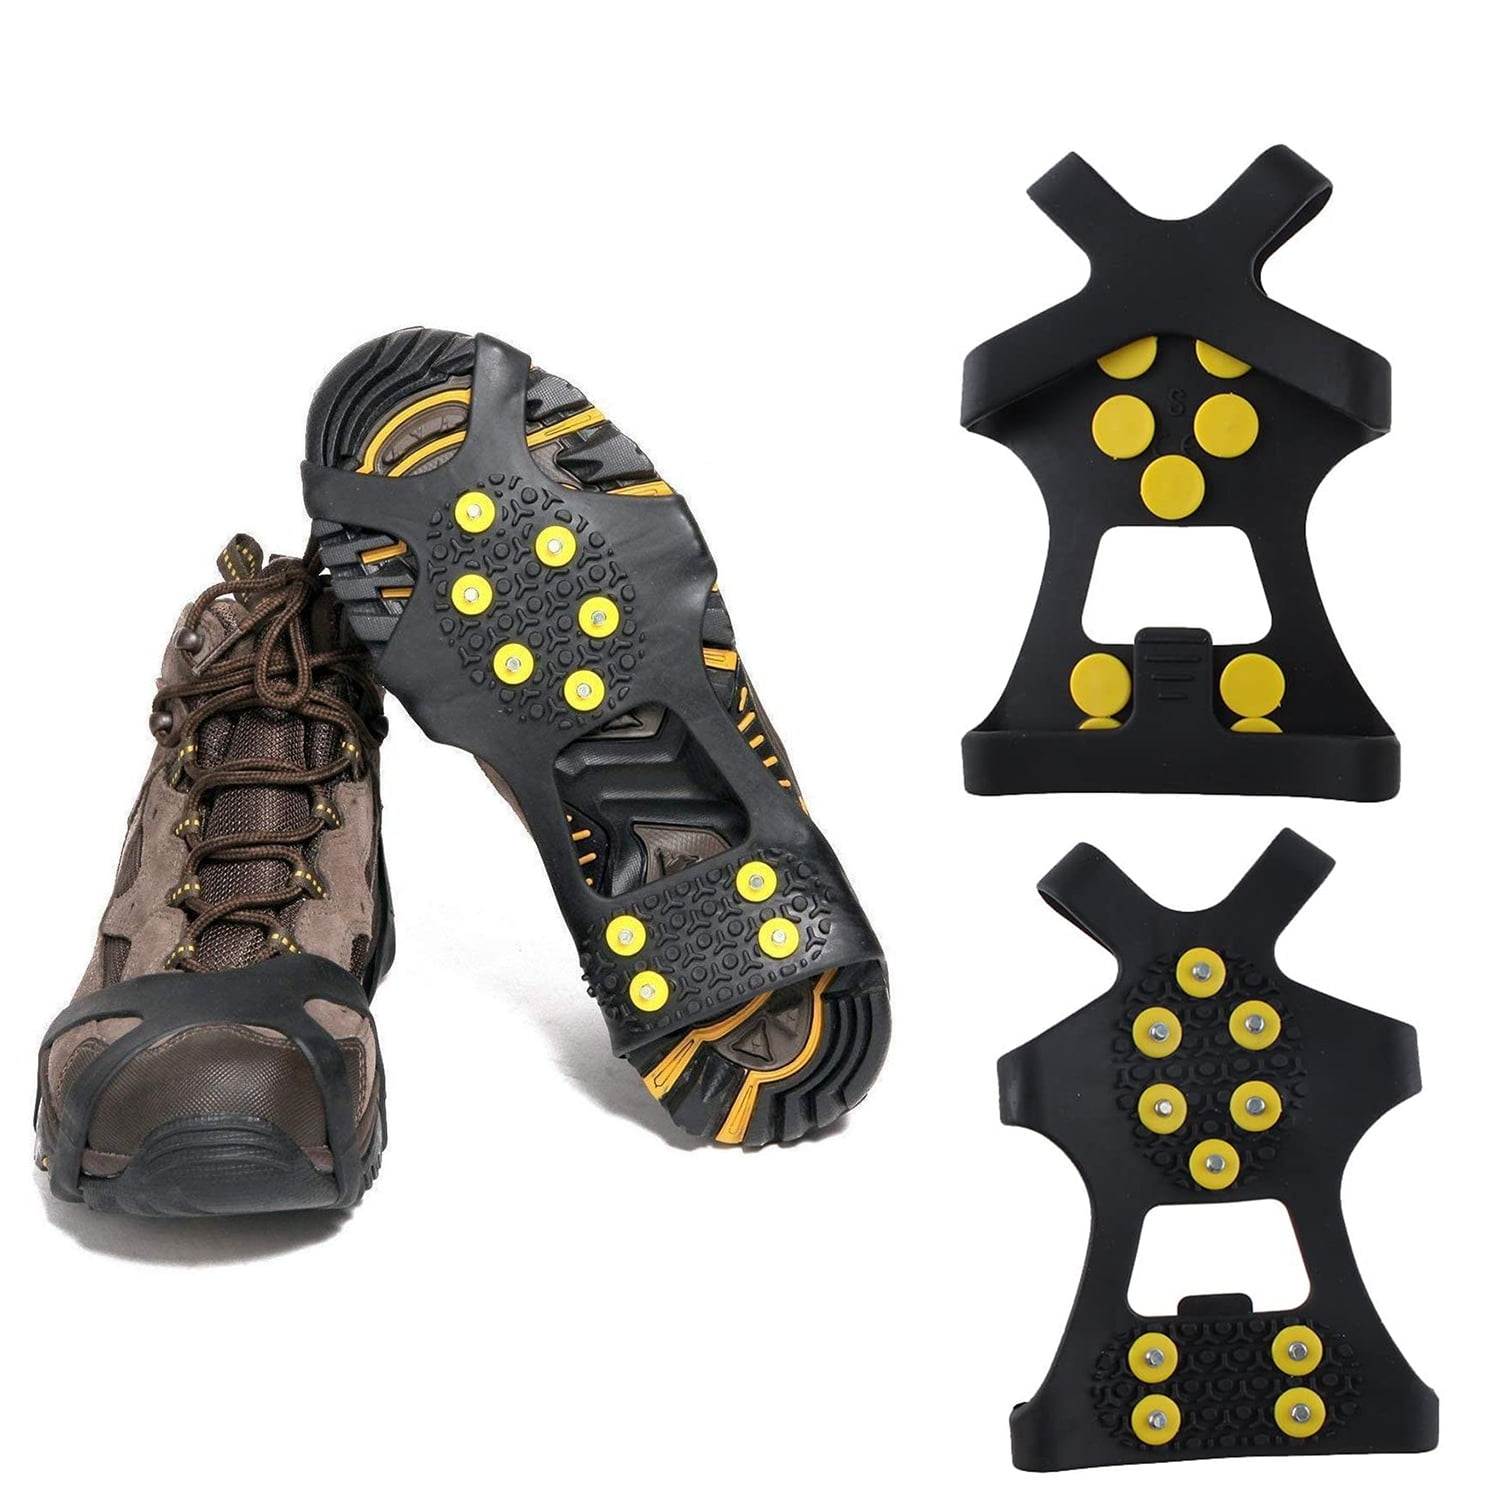 Ice Snow Grips Anti Slip On Over shoe Boot studs Crampons Cleats Spikes Grippers 